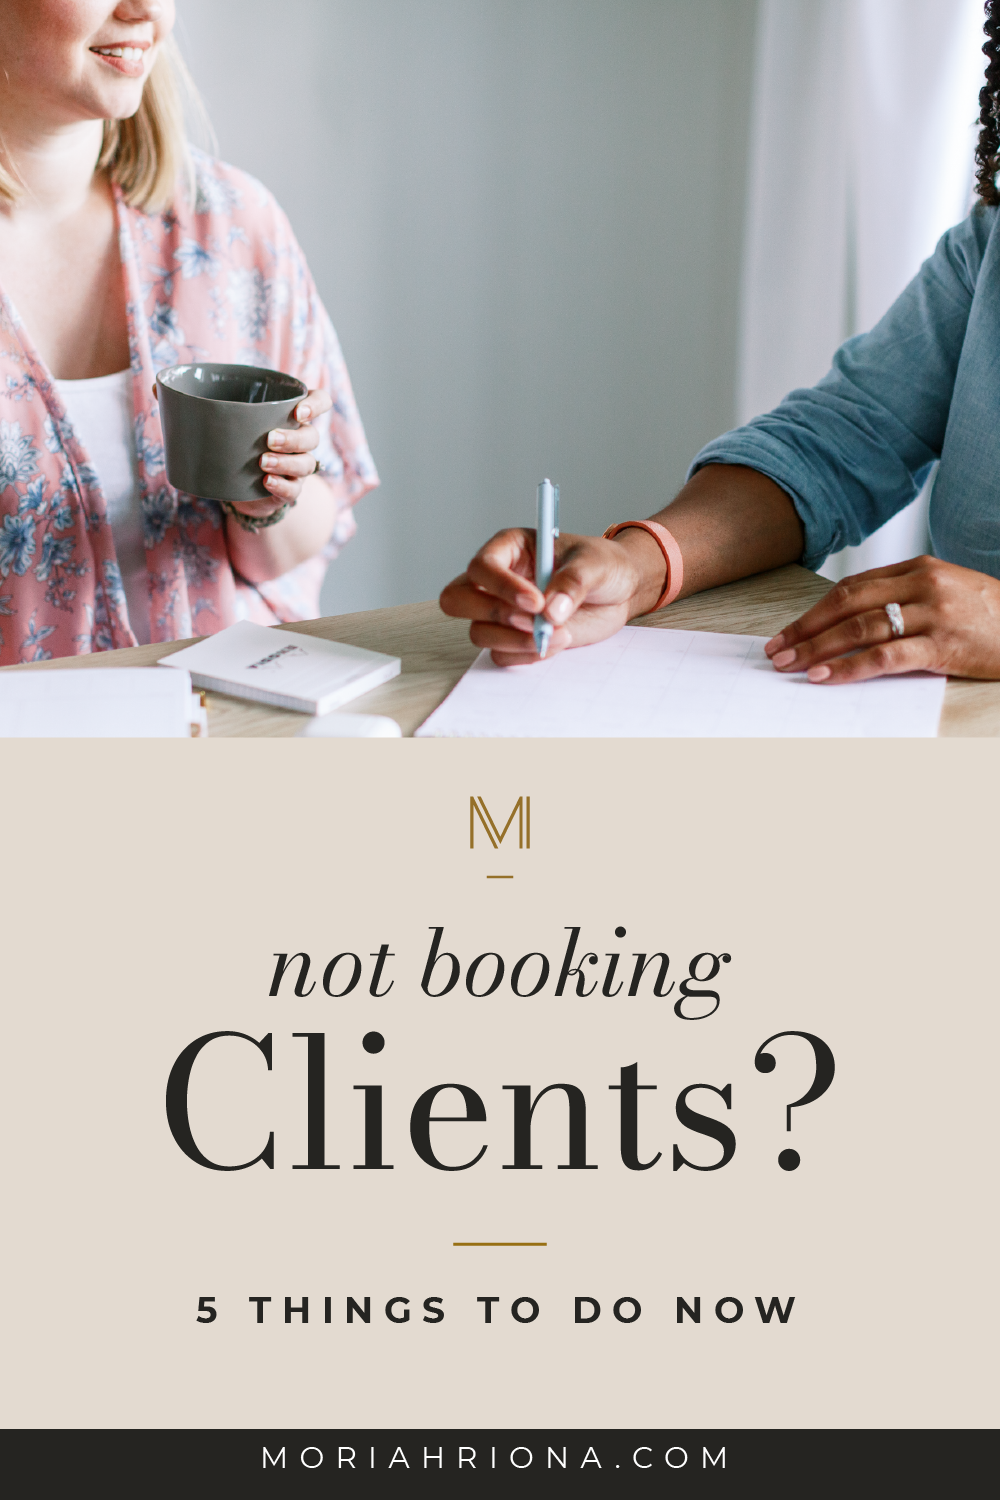 Are you struggling to book potential clients? Or worse—not attracting any leads in the first place? This blog post is for you! I’m sharing the top 5 reasons why you’re not booking clients, including how to confidently pitch to prospects and how to get clients by attracting ideal leads! #marketingtips #luxurybrand #marketing #femaleentrepreneur